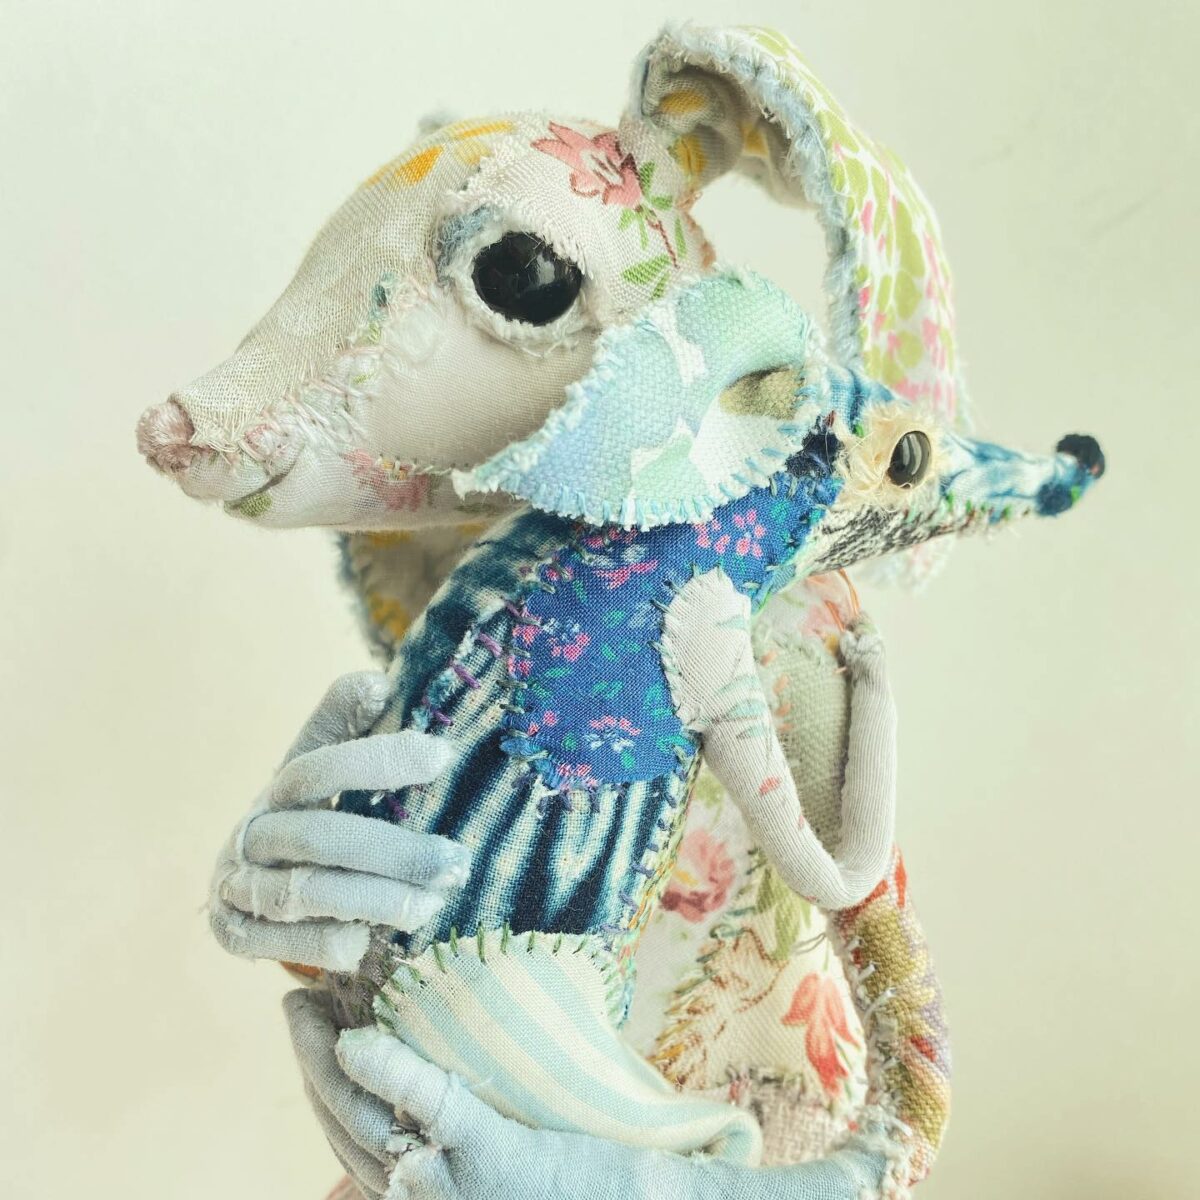 Pretty Scruffy Enchanting Animal Textile Sculptures By Bryony Rose Jennings 6